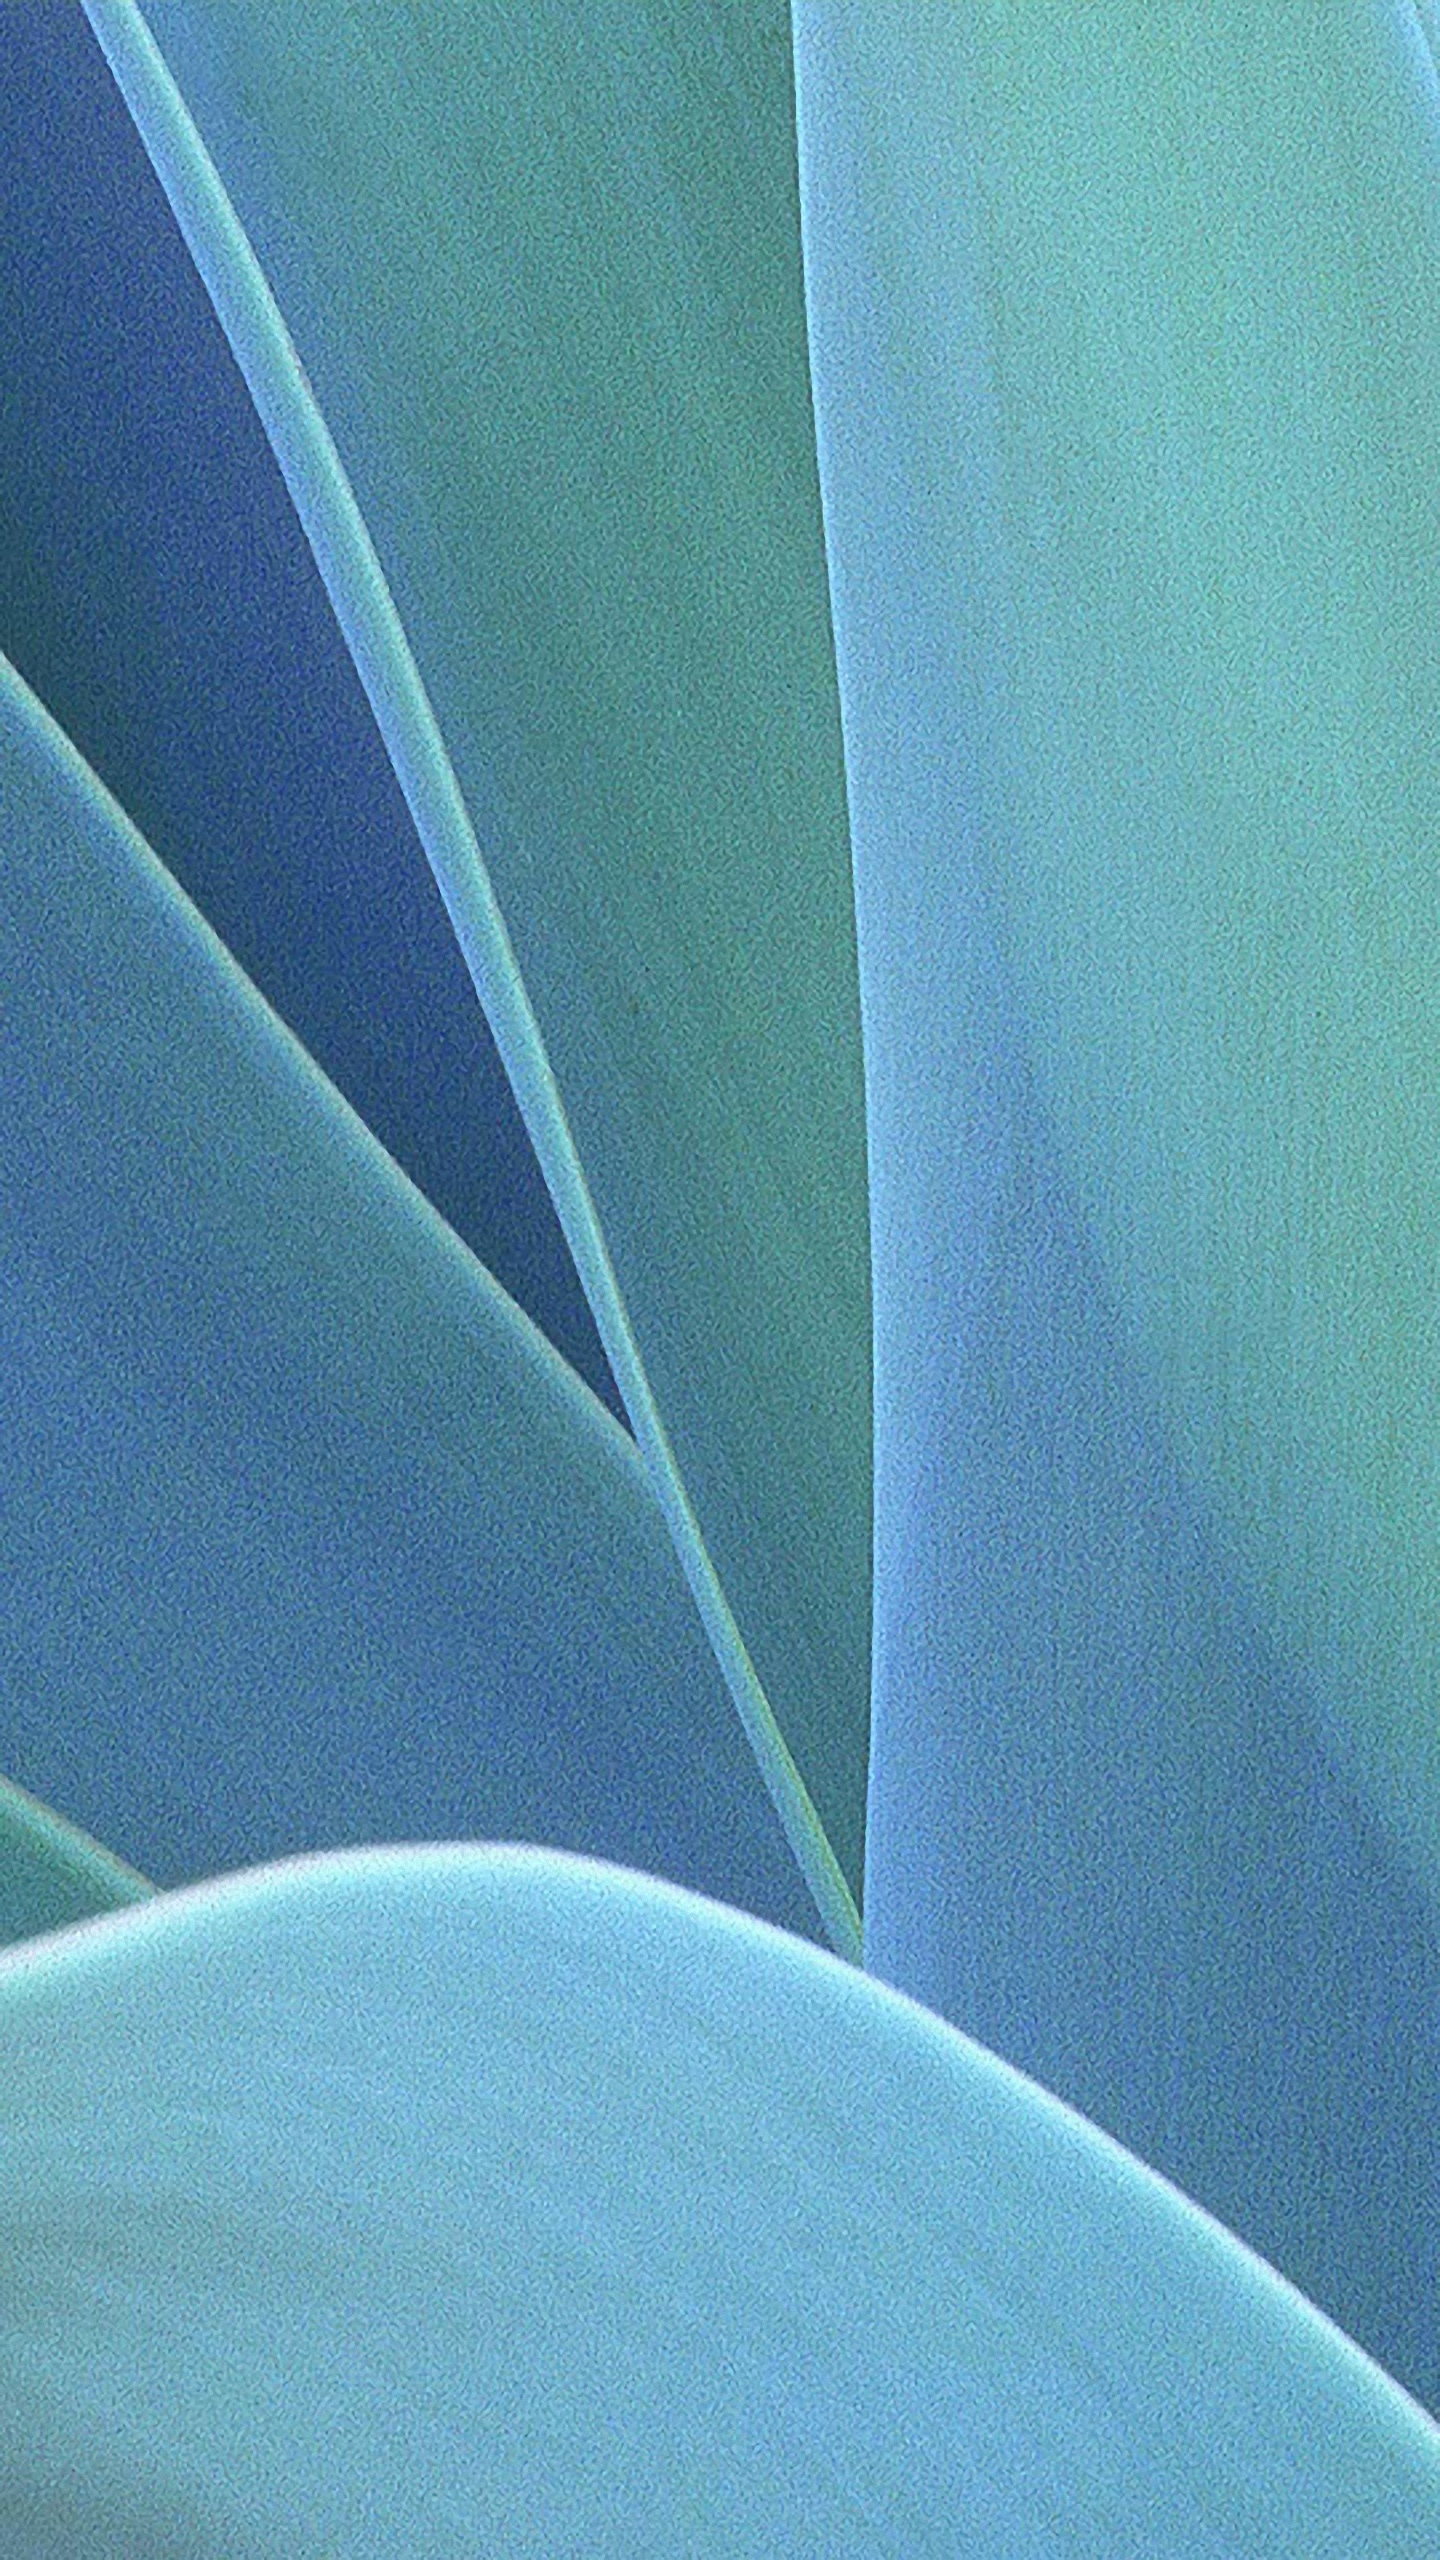 Hd Extreme Closeup Lg G4/g5 Wallpapers - Agave - 1440x2560 Wallpaper ...